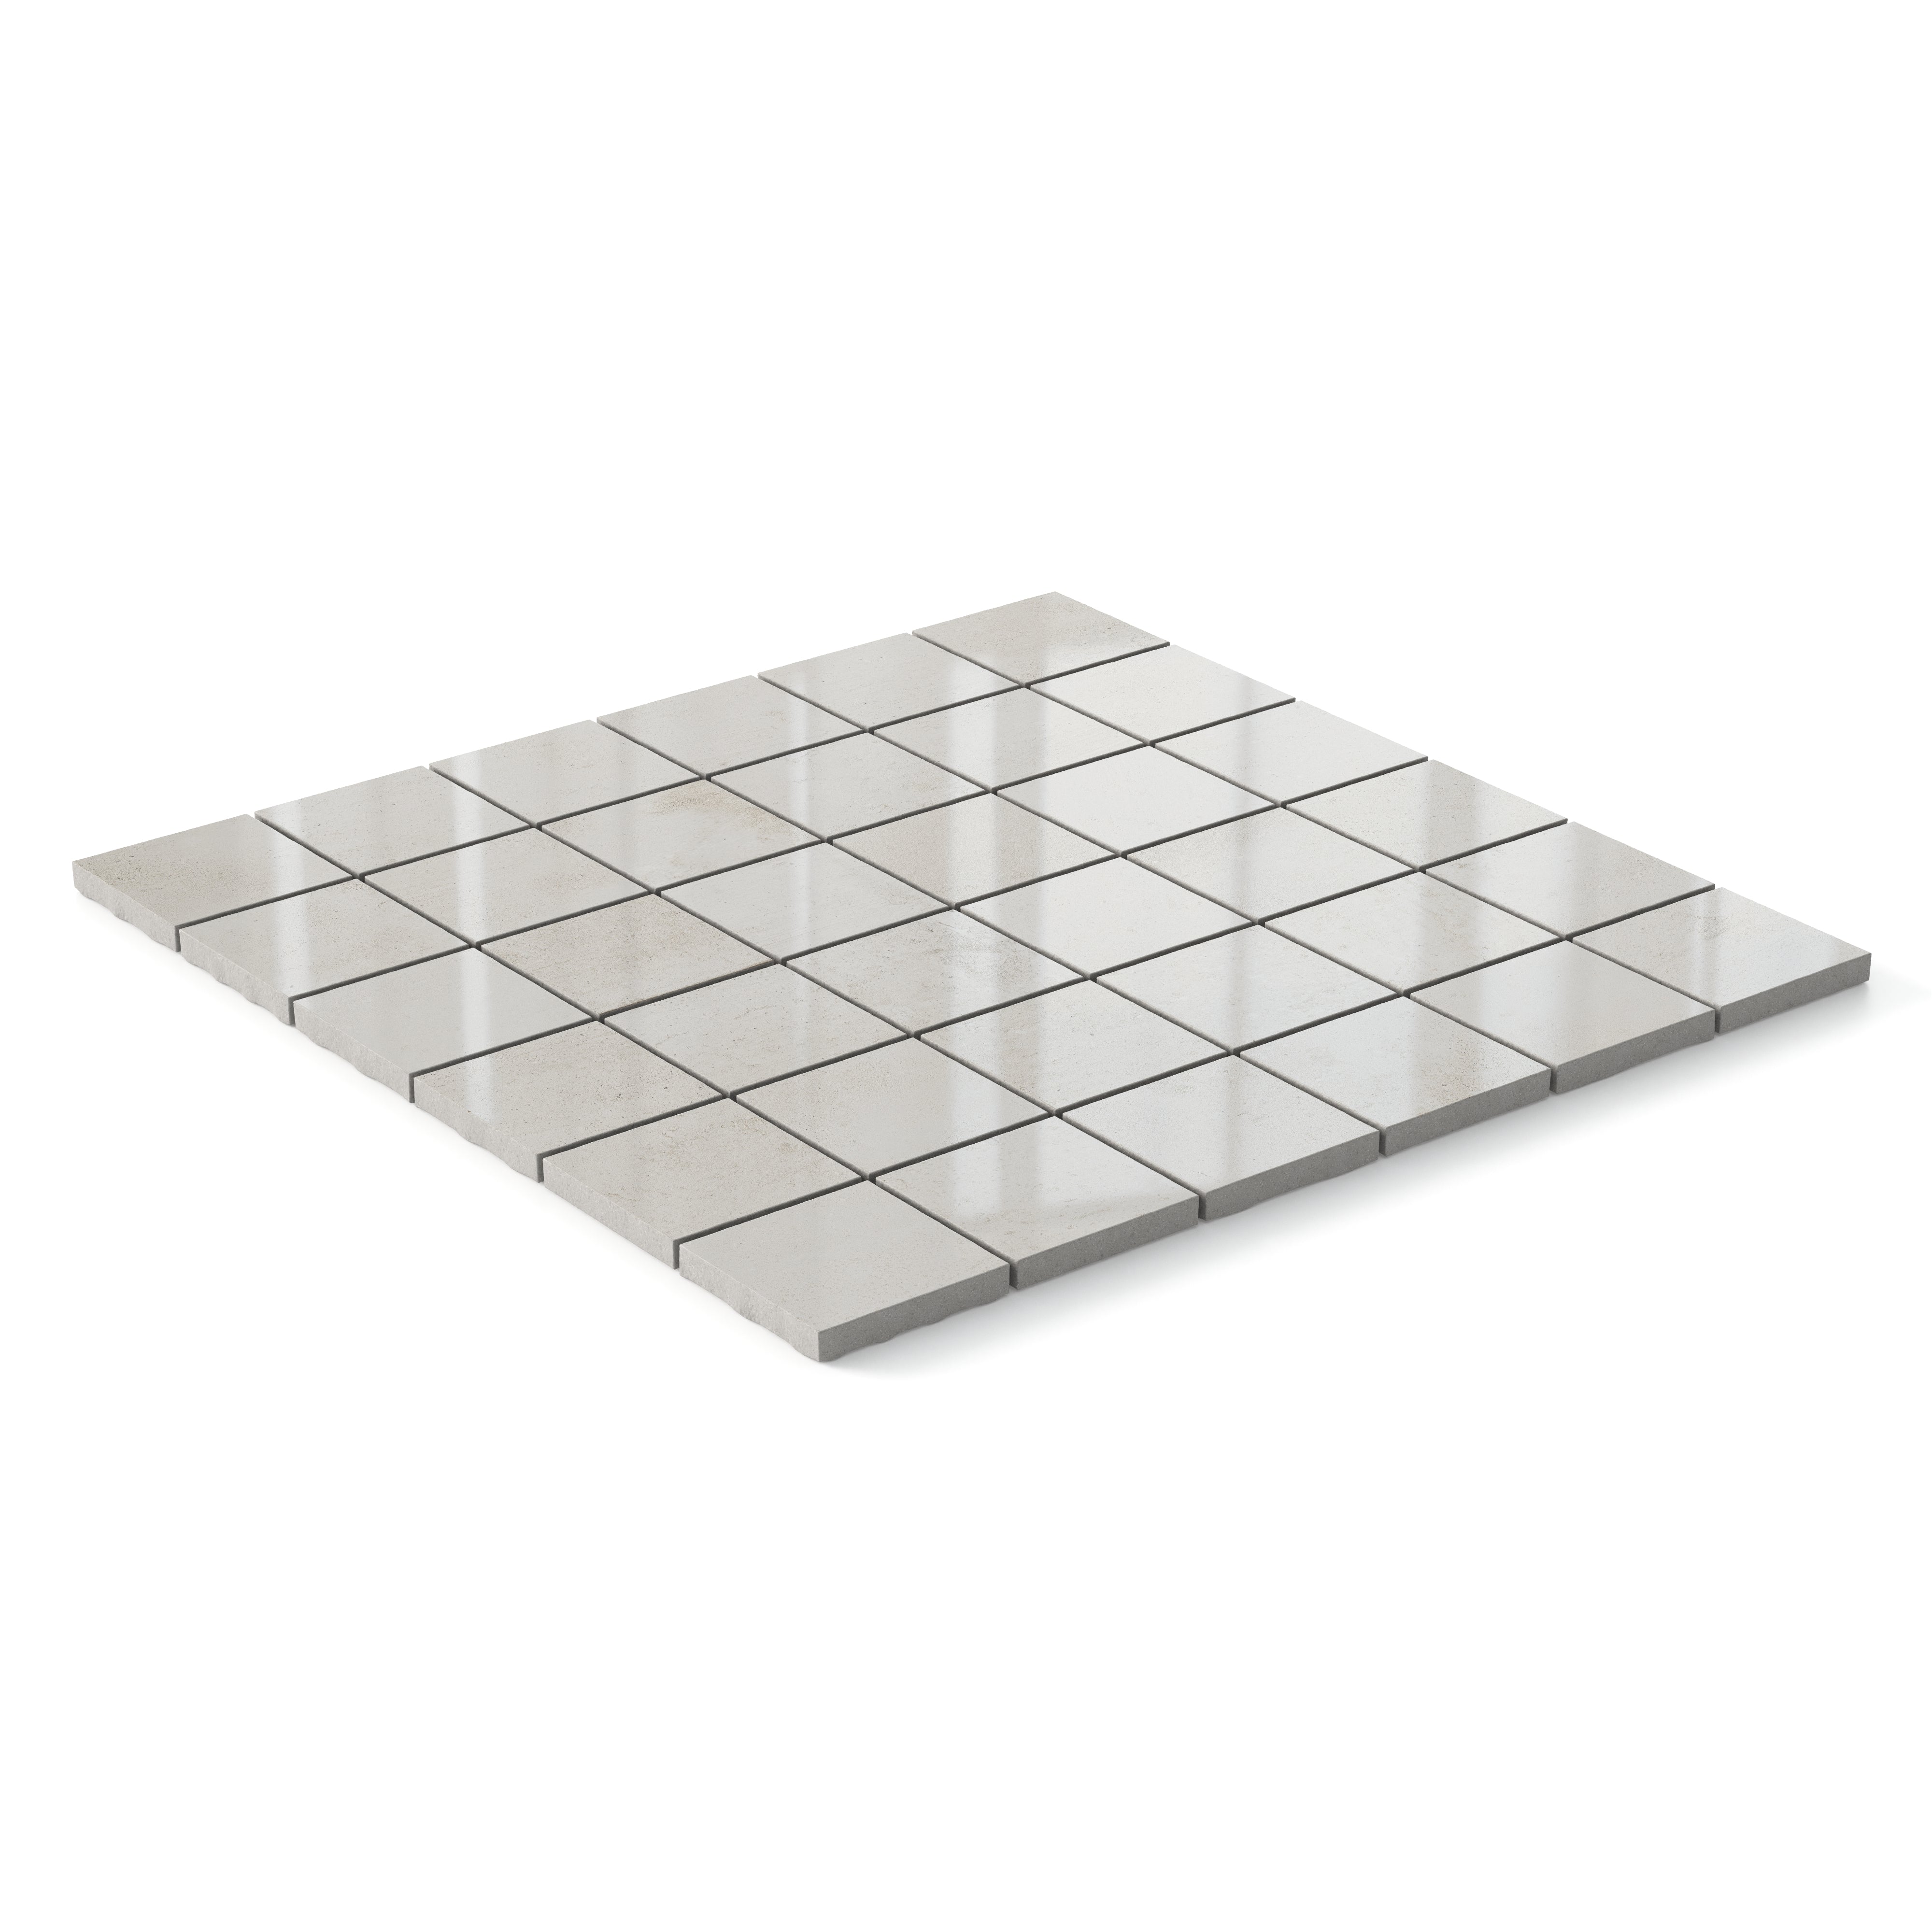 Ramsey 2x2 Polished Porcelain Mosaic Tile in Chalk